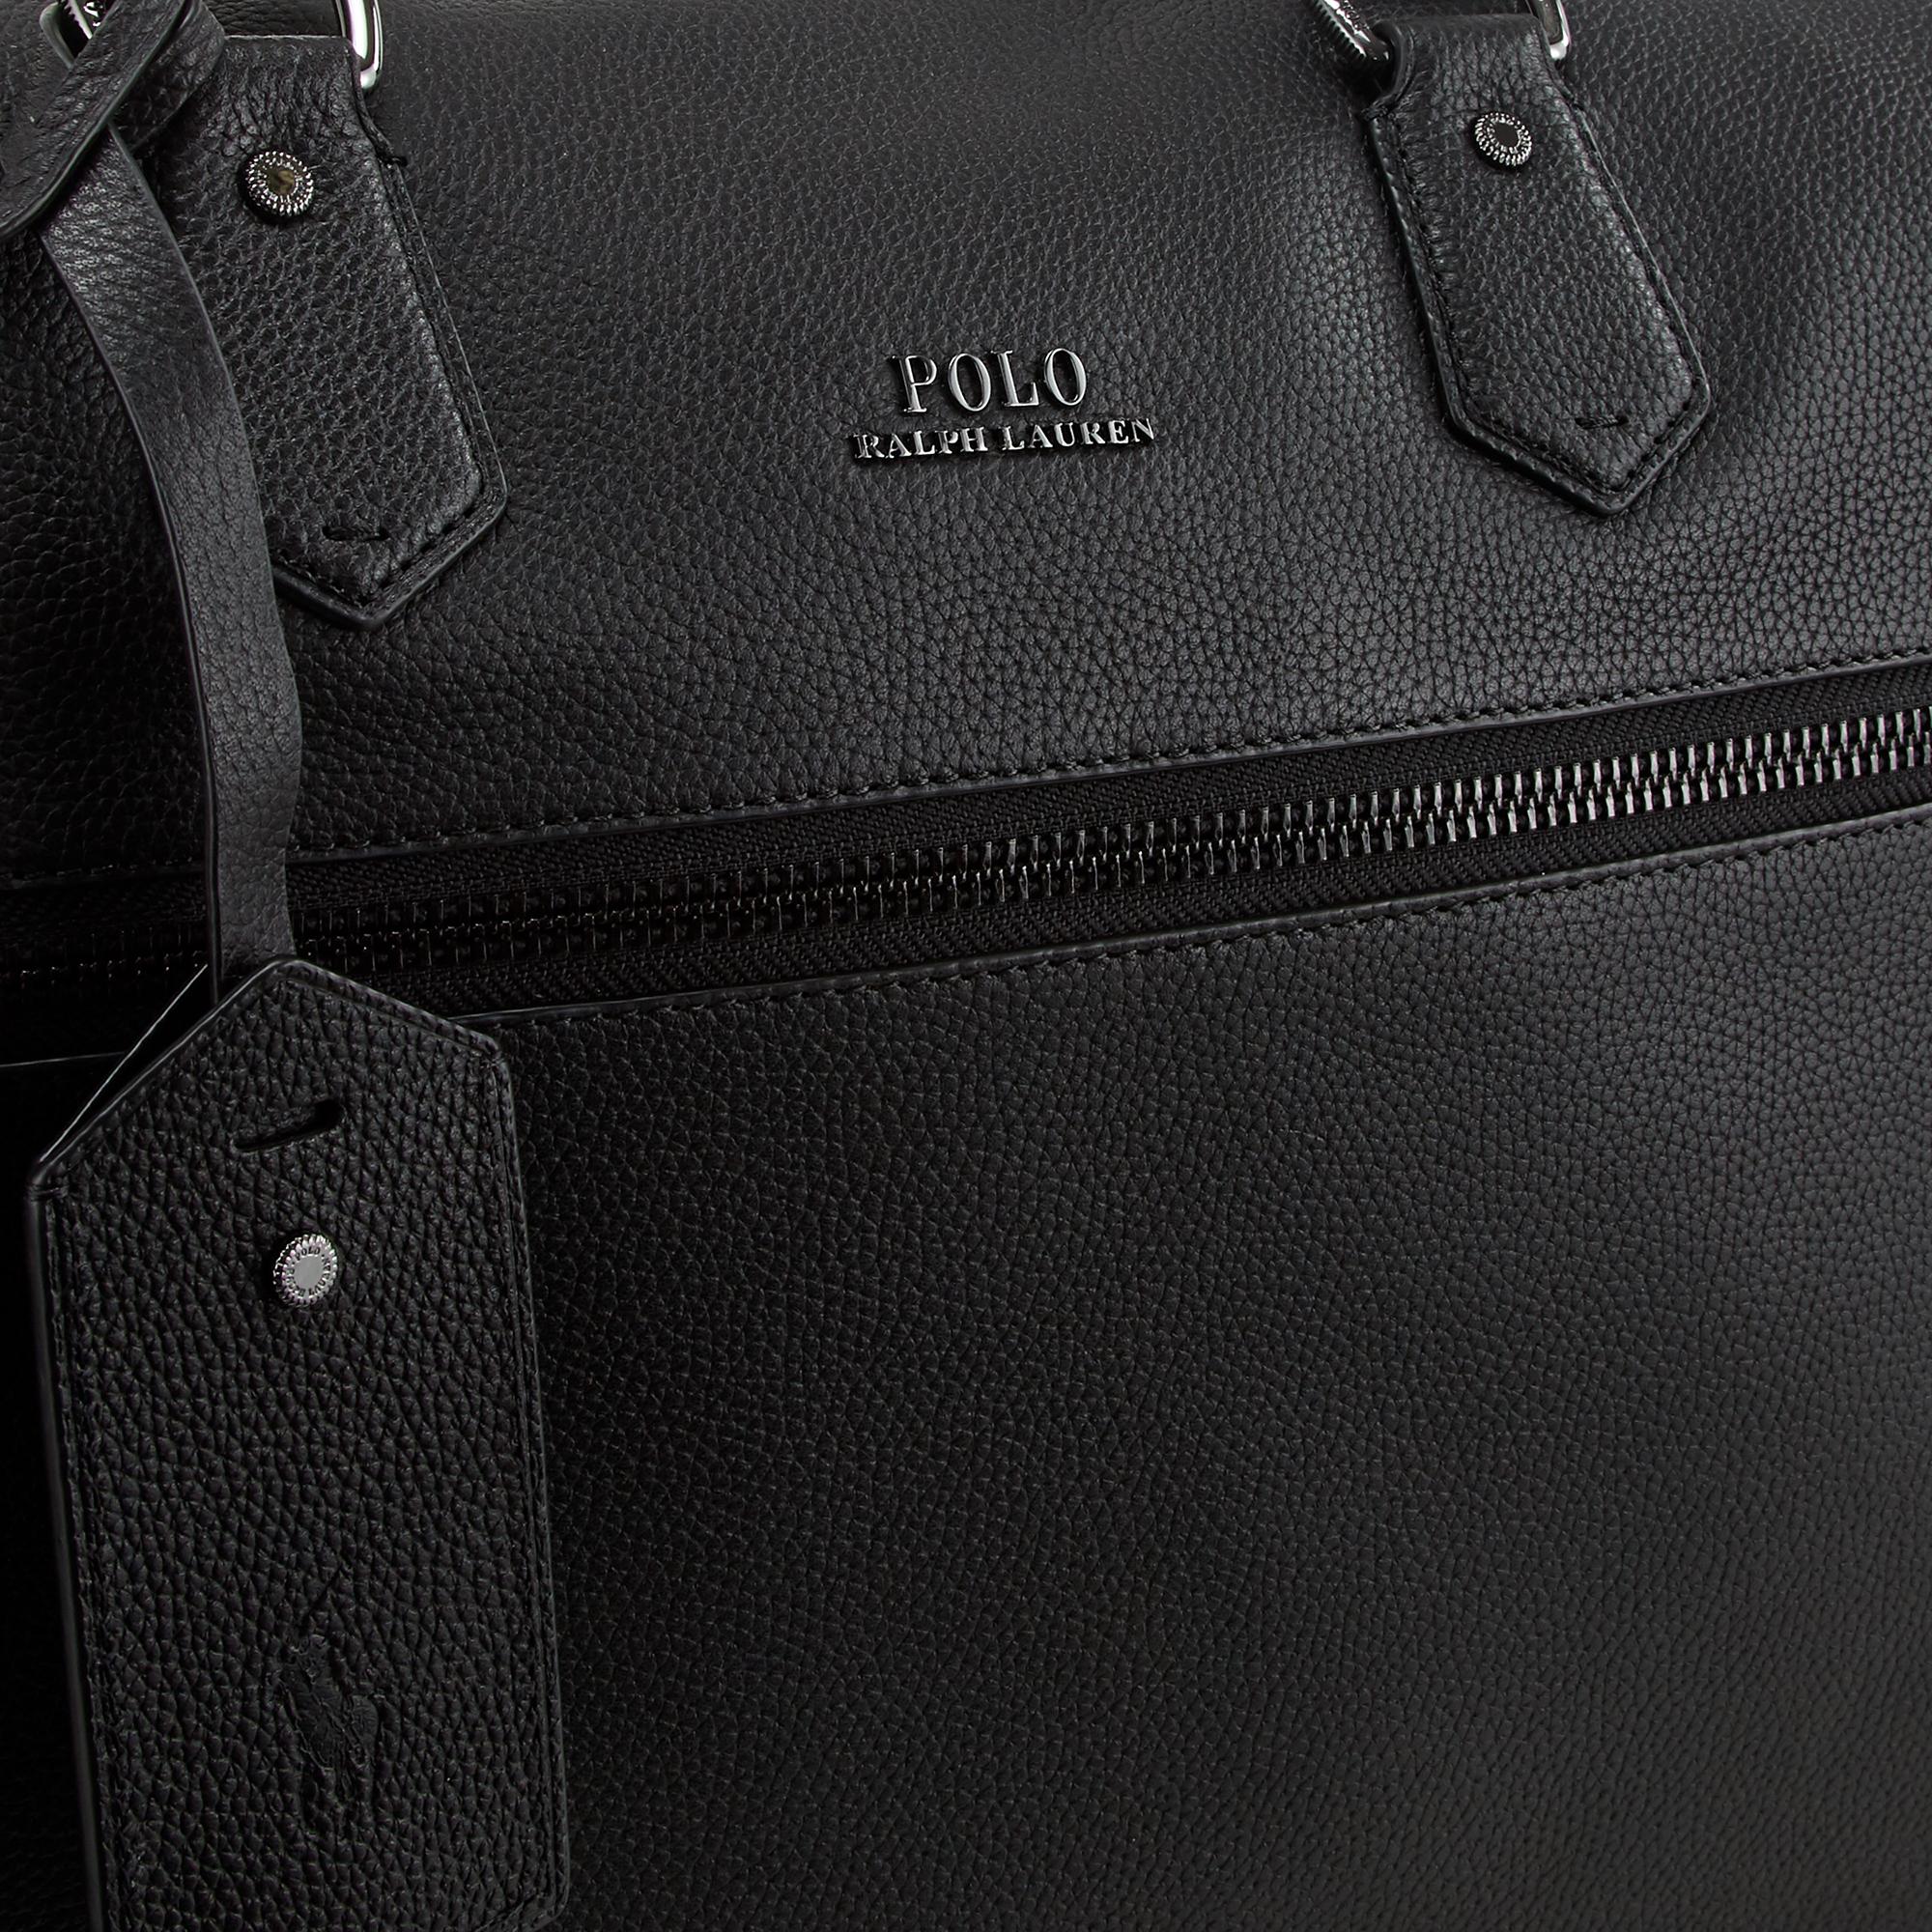 Pebbled Leather Duffle Bag